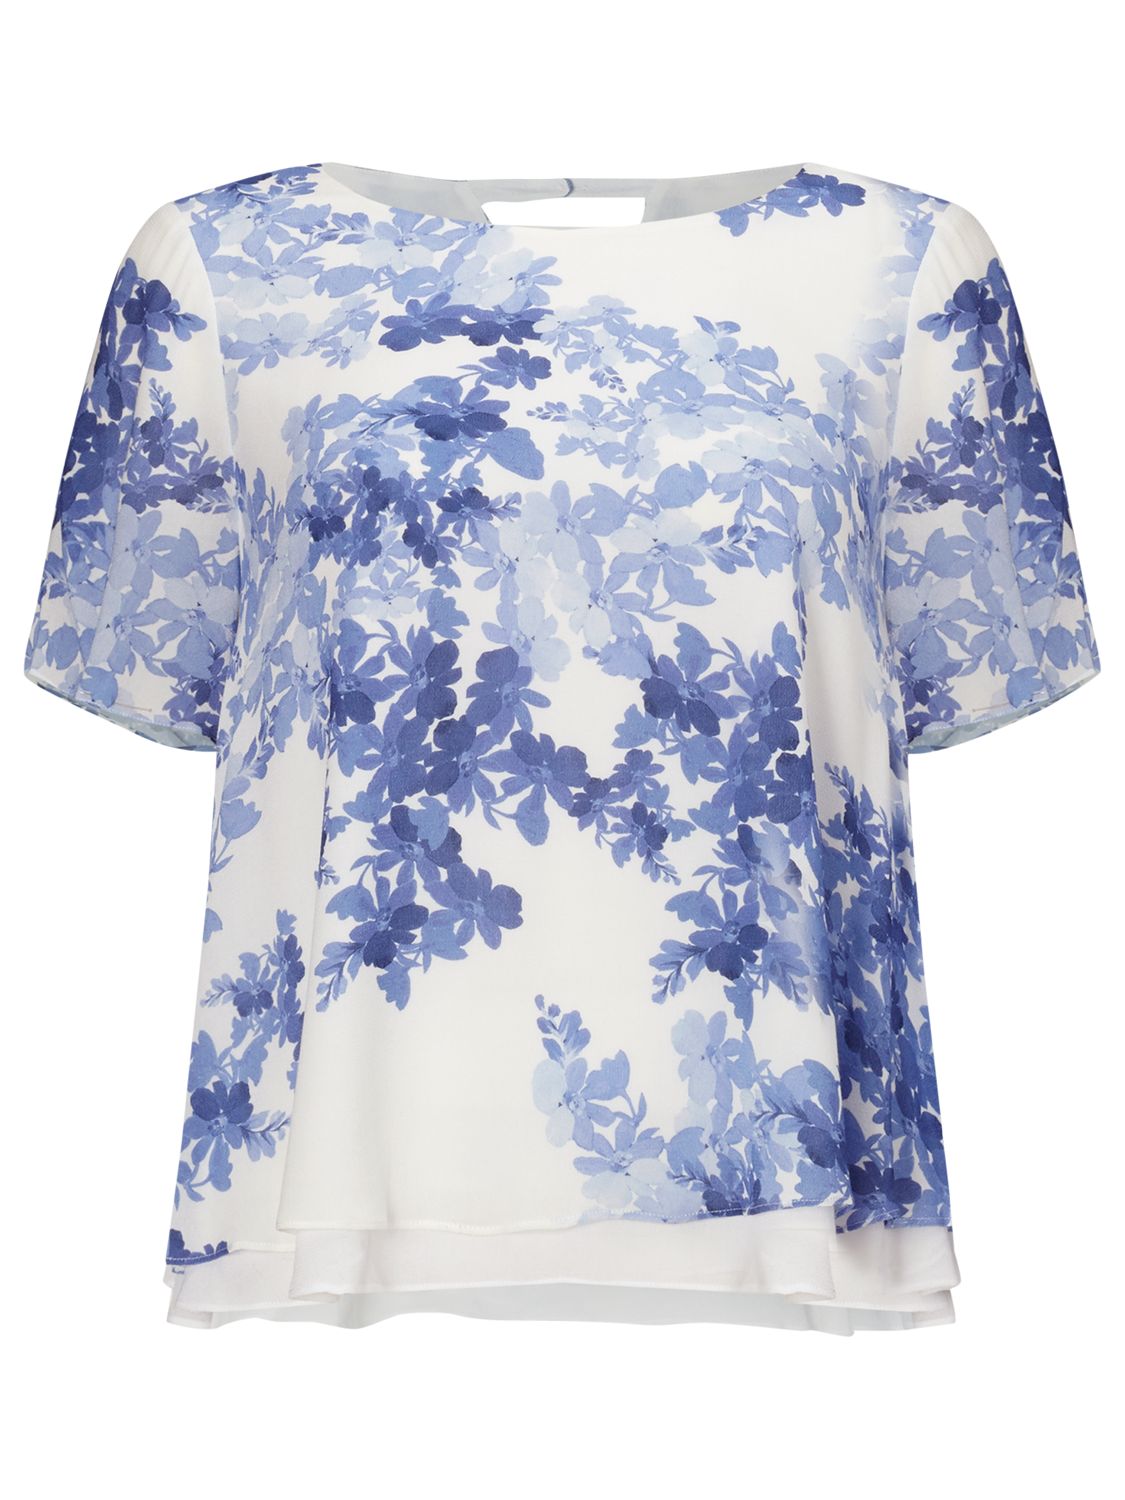 Phase Eight Padua Floral Blouse, Ivory/Anenome at John Lewis & Partners